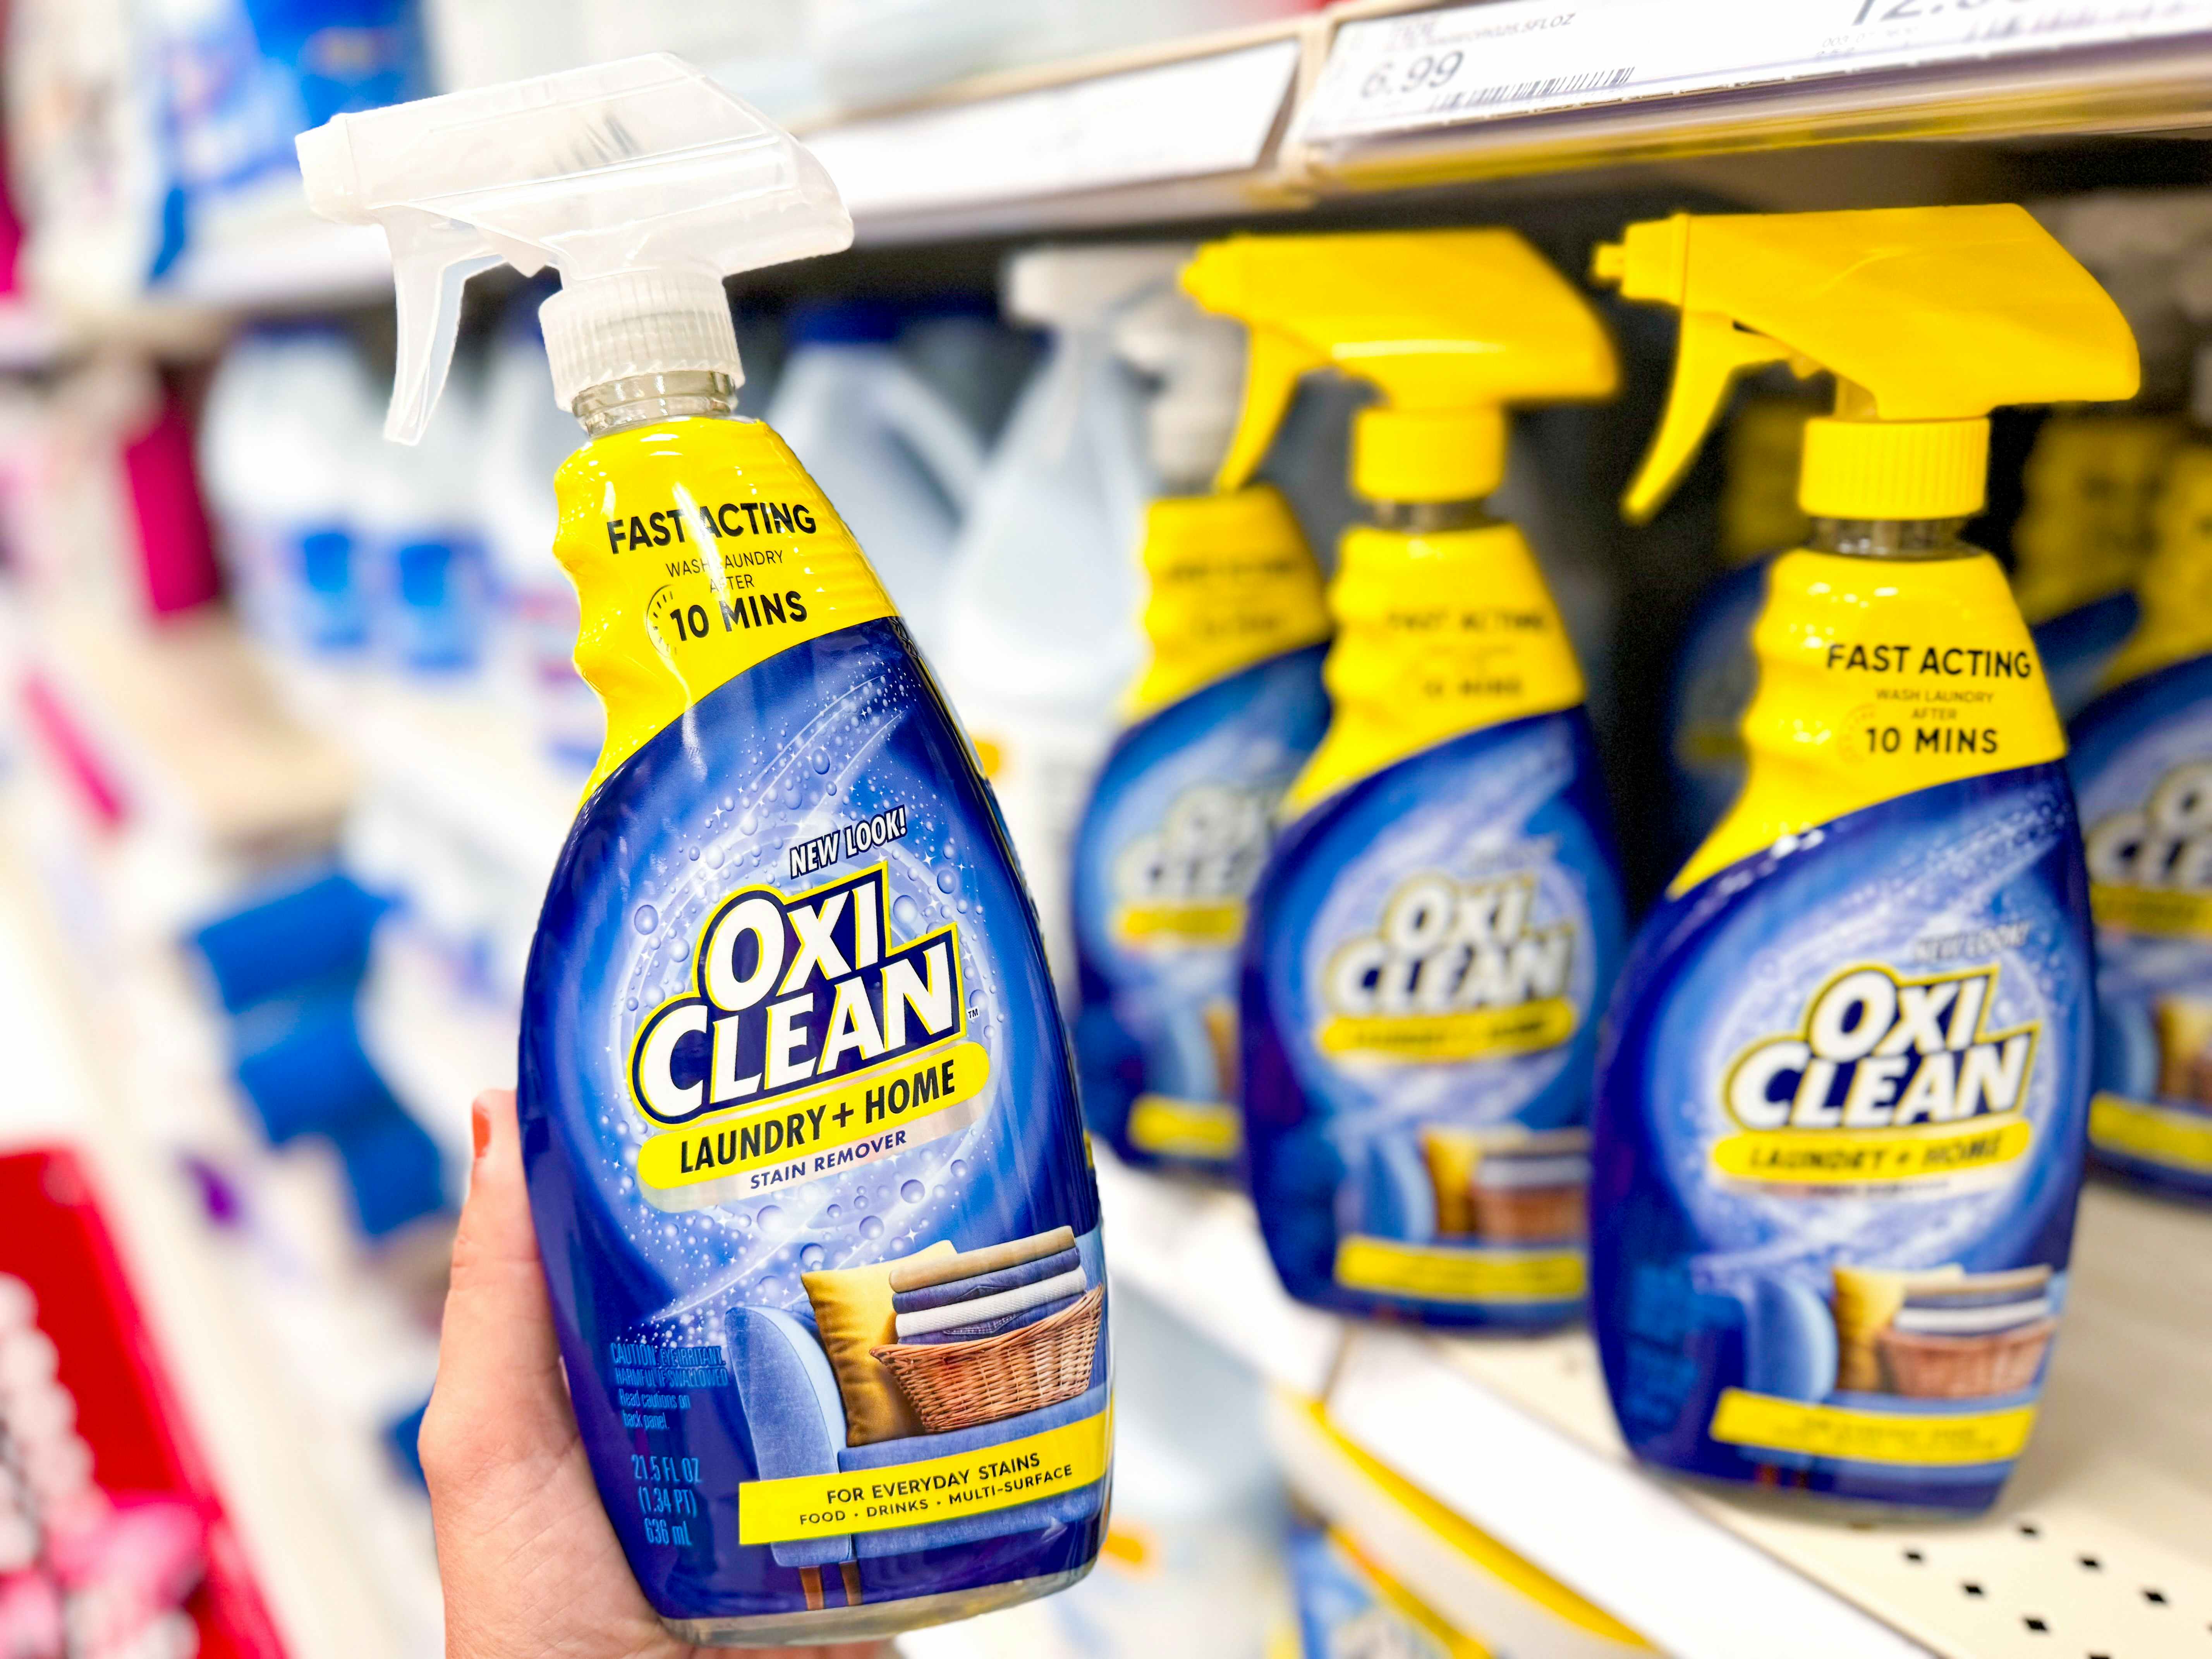 OxiClean Laundry Stain Remover Spray, Only $1.72 at Target